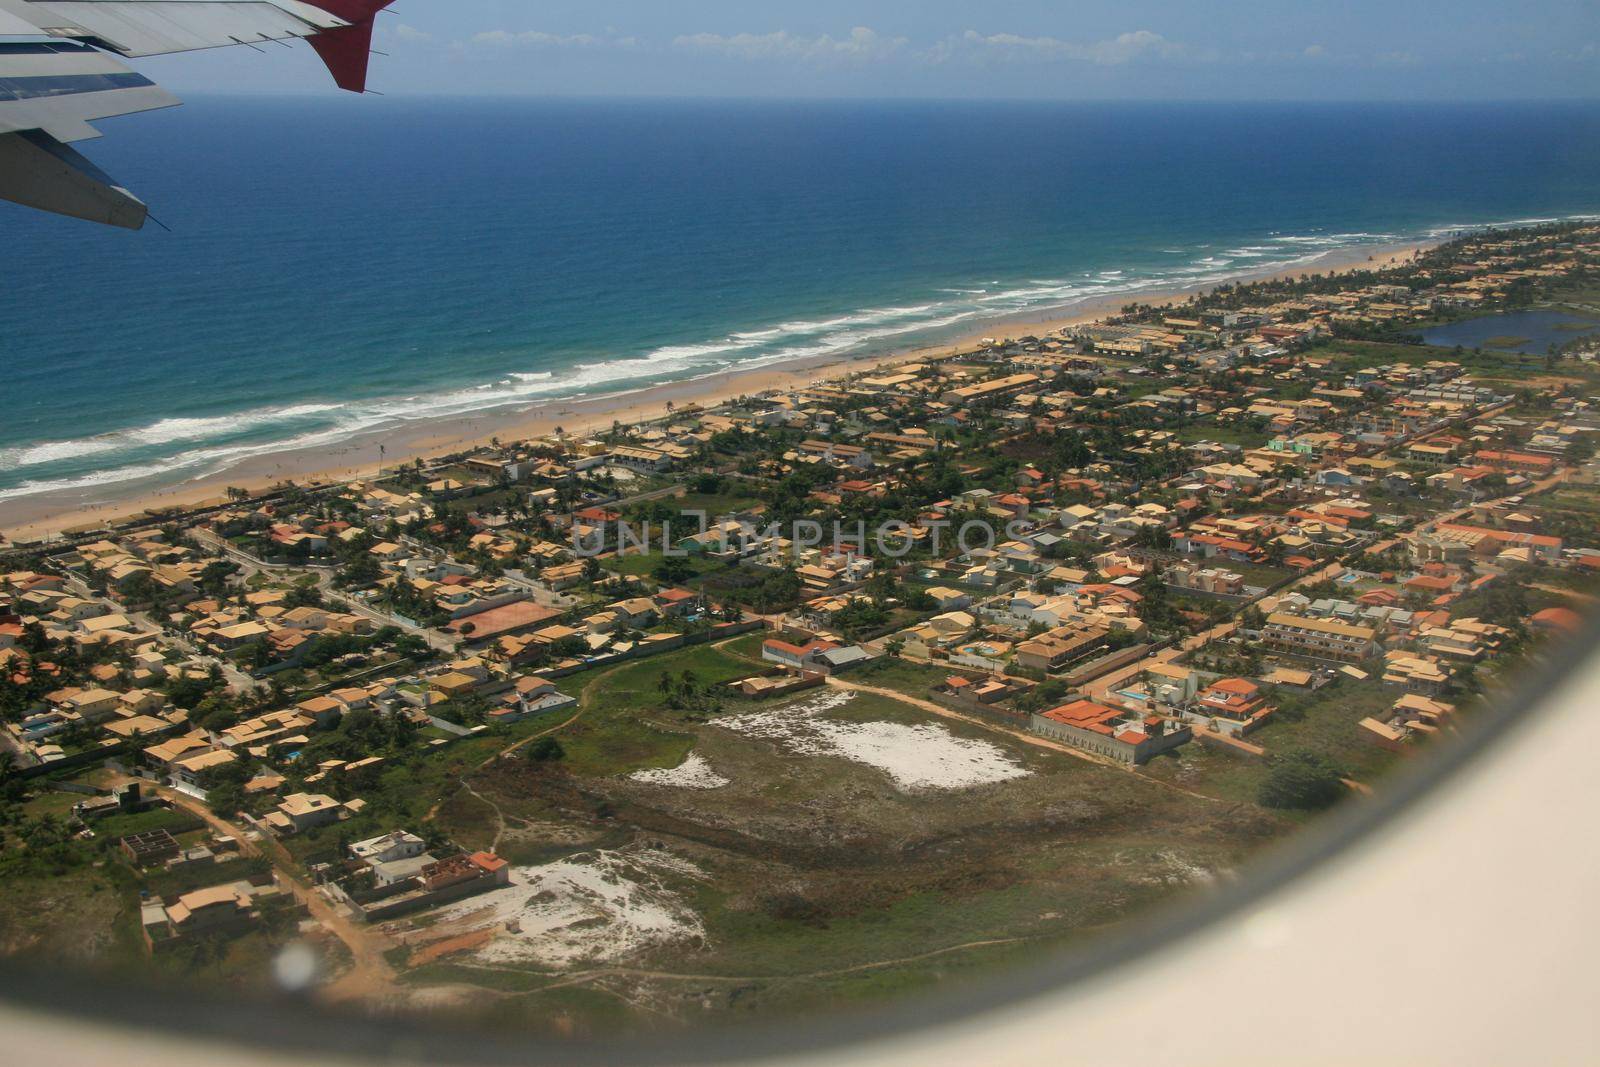 city seen from the window of an airplane by joasouza